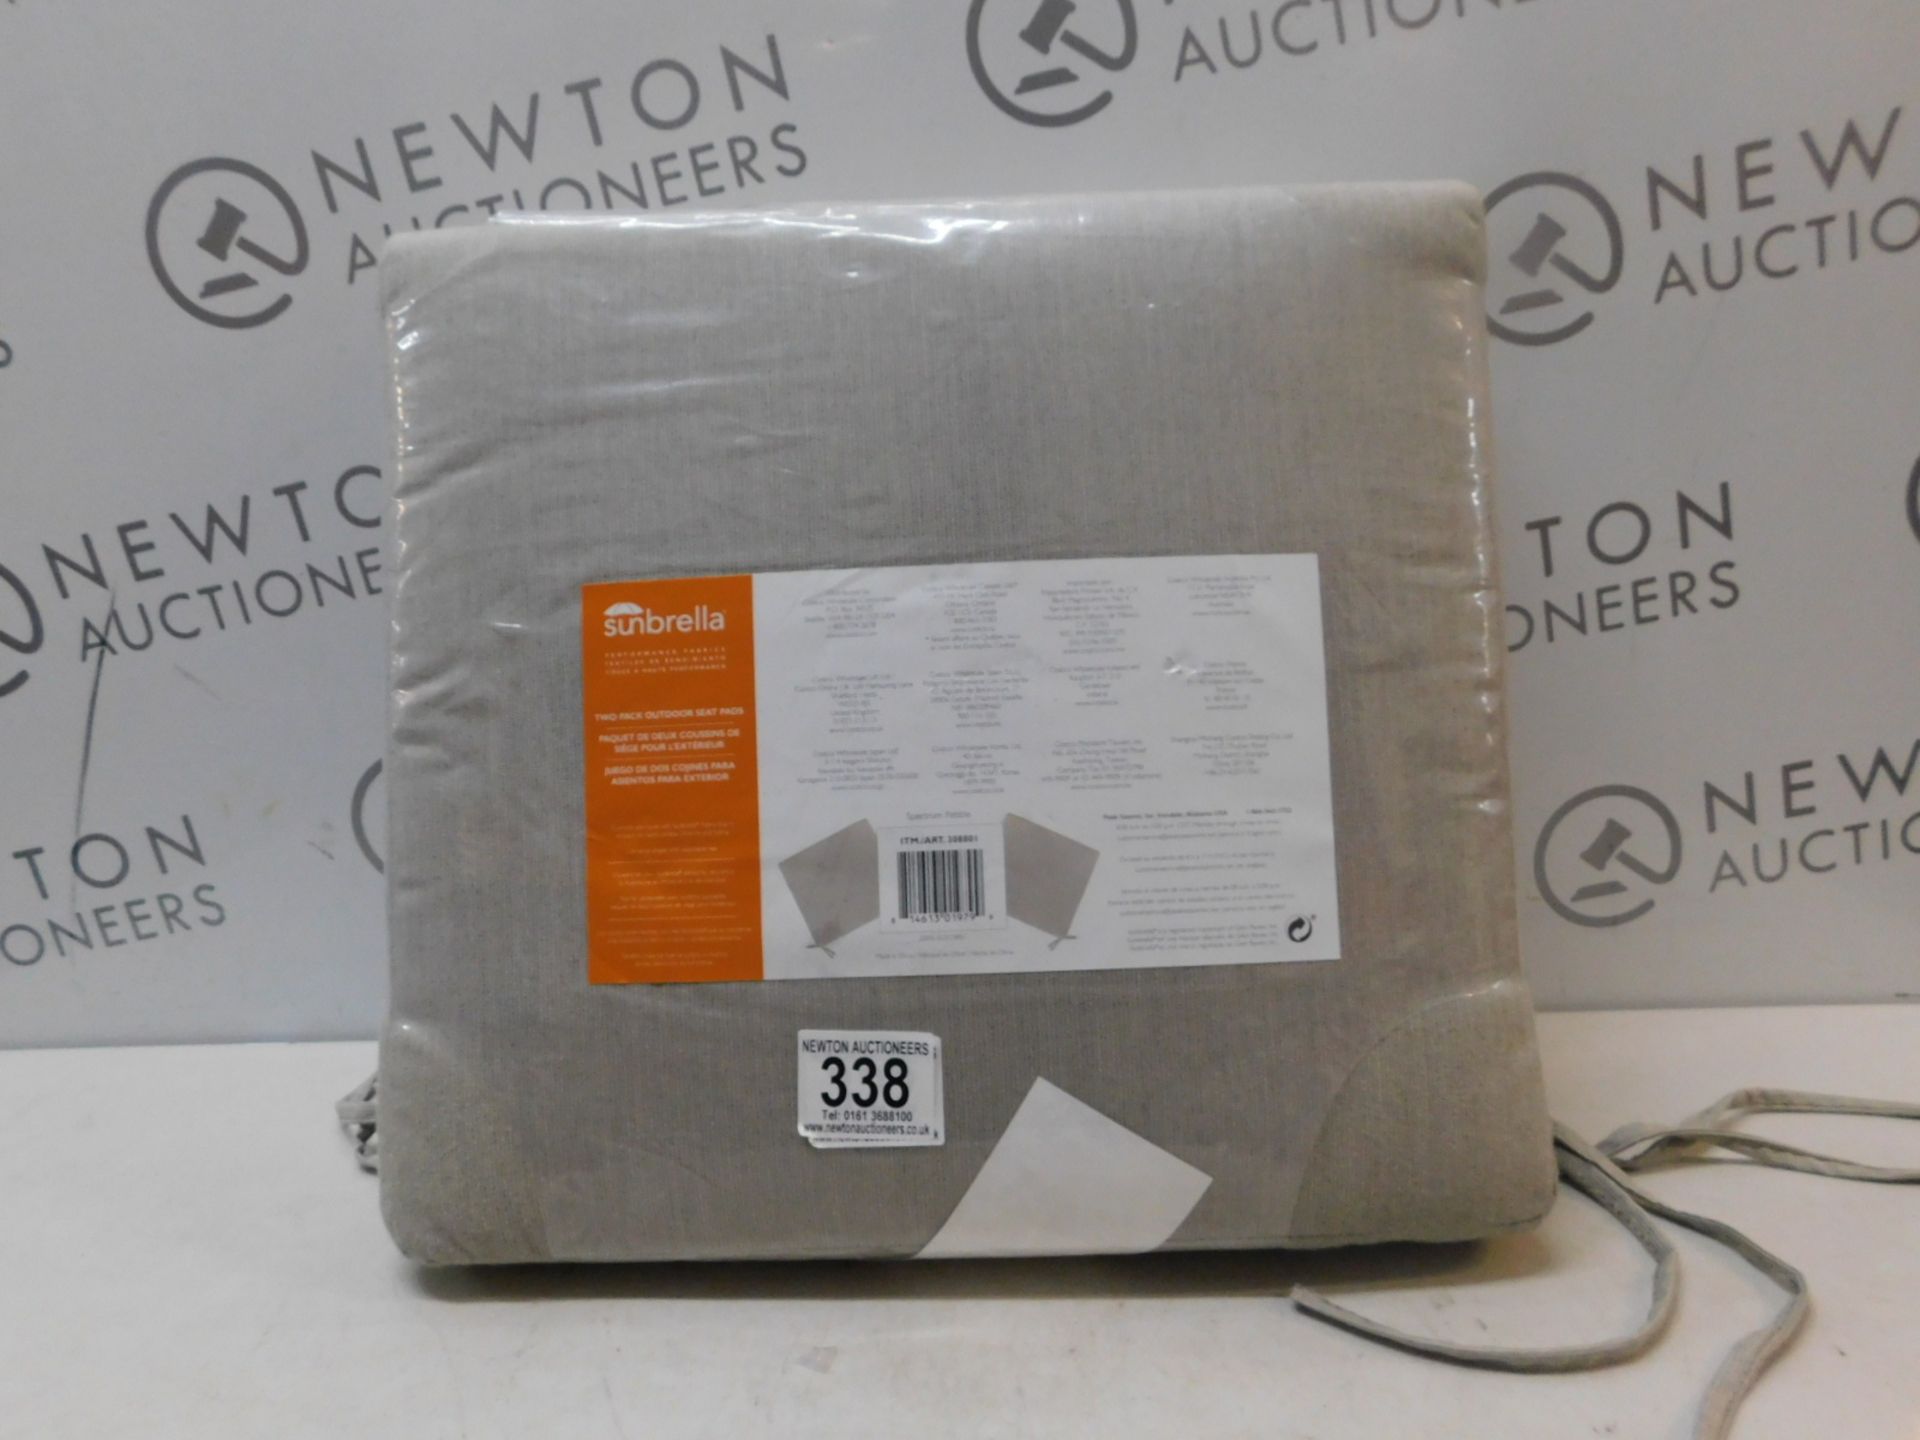 1 NEW PACK OF 2 SUNBRELLA 46 X 40 CM OUTDOOR SEAT PADS RRP Â£49